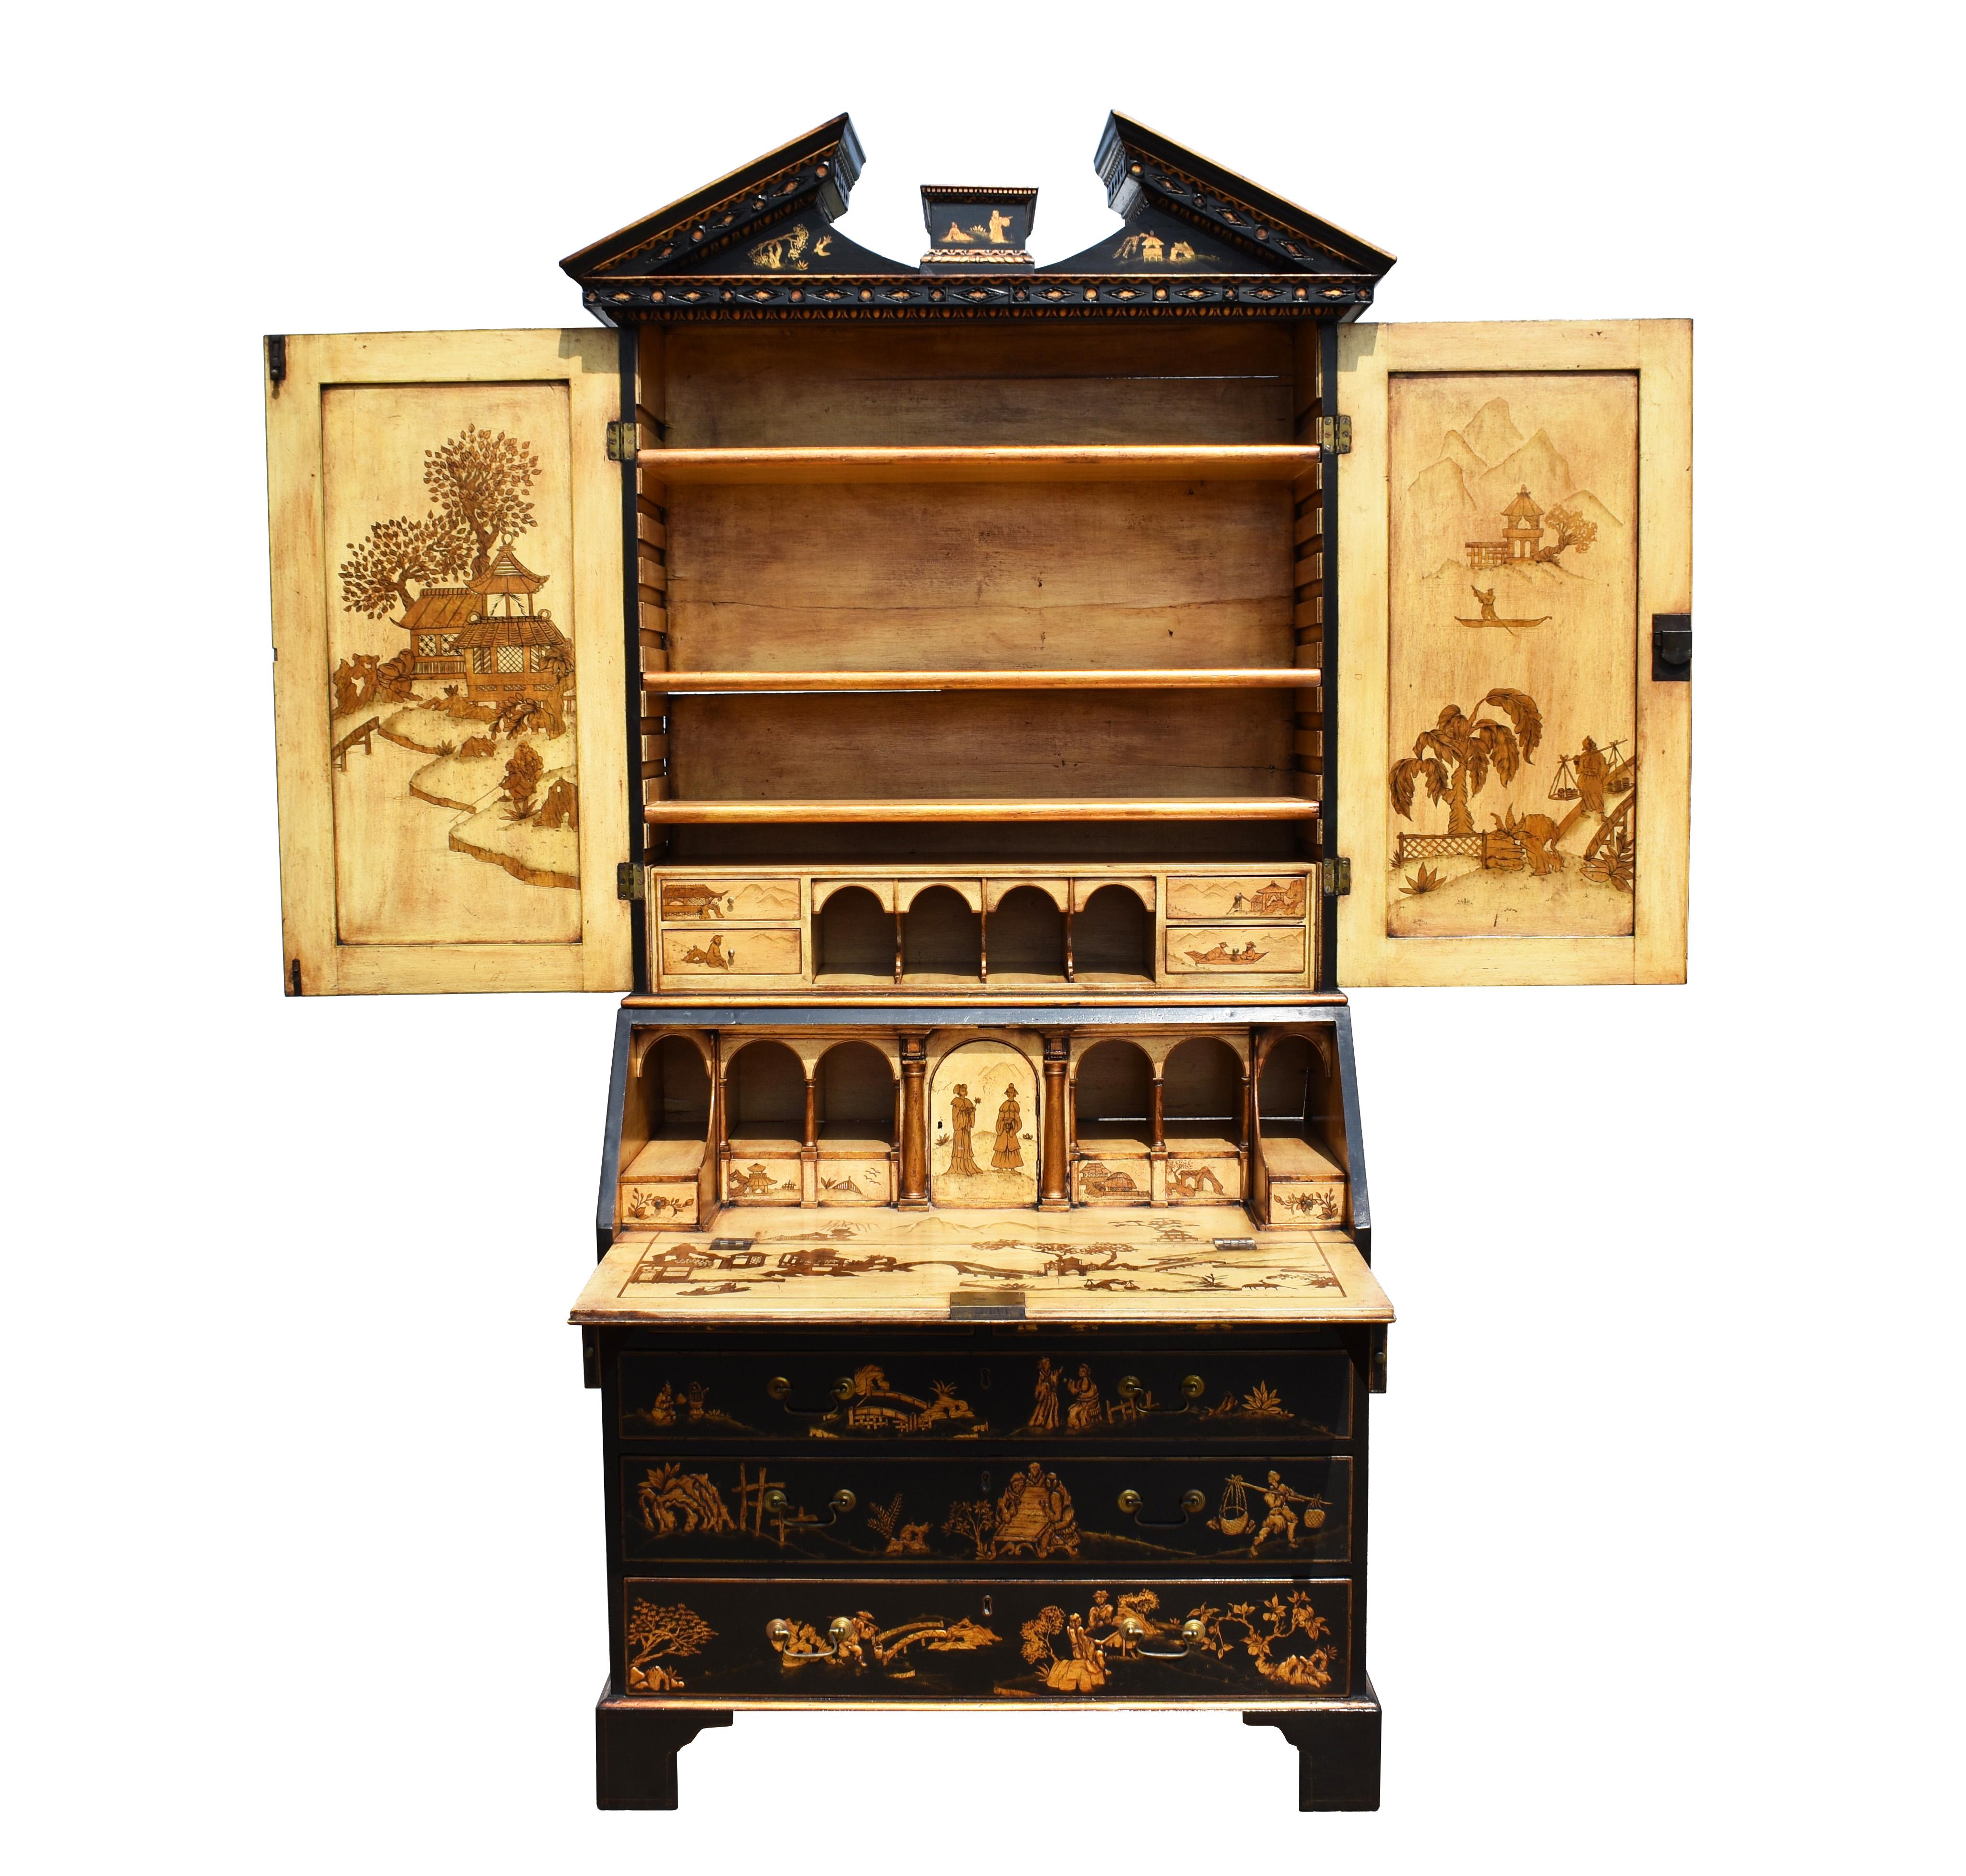 A good quality English 18th century George II lacquer and gilt chinoiserie secretary bookcase, having a broken arched pediment with hand carved mouldings above two paneled doors opening to reveal a fully decorated and partly fitted interior above